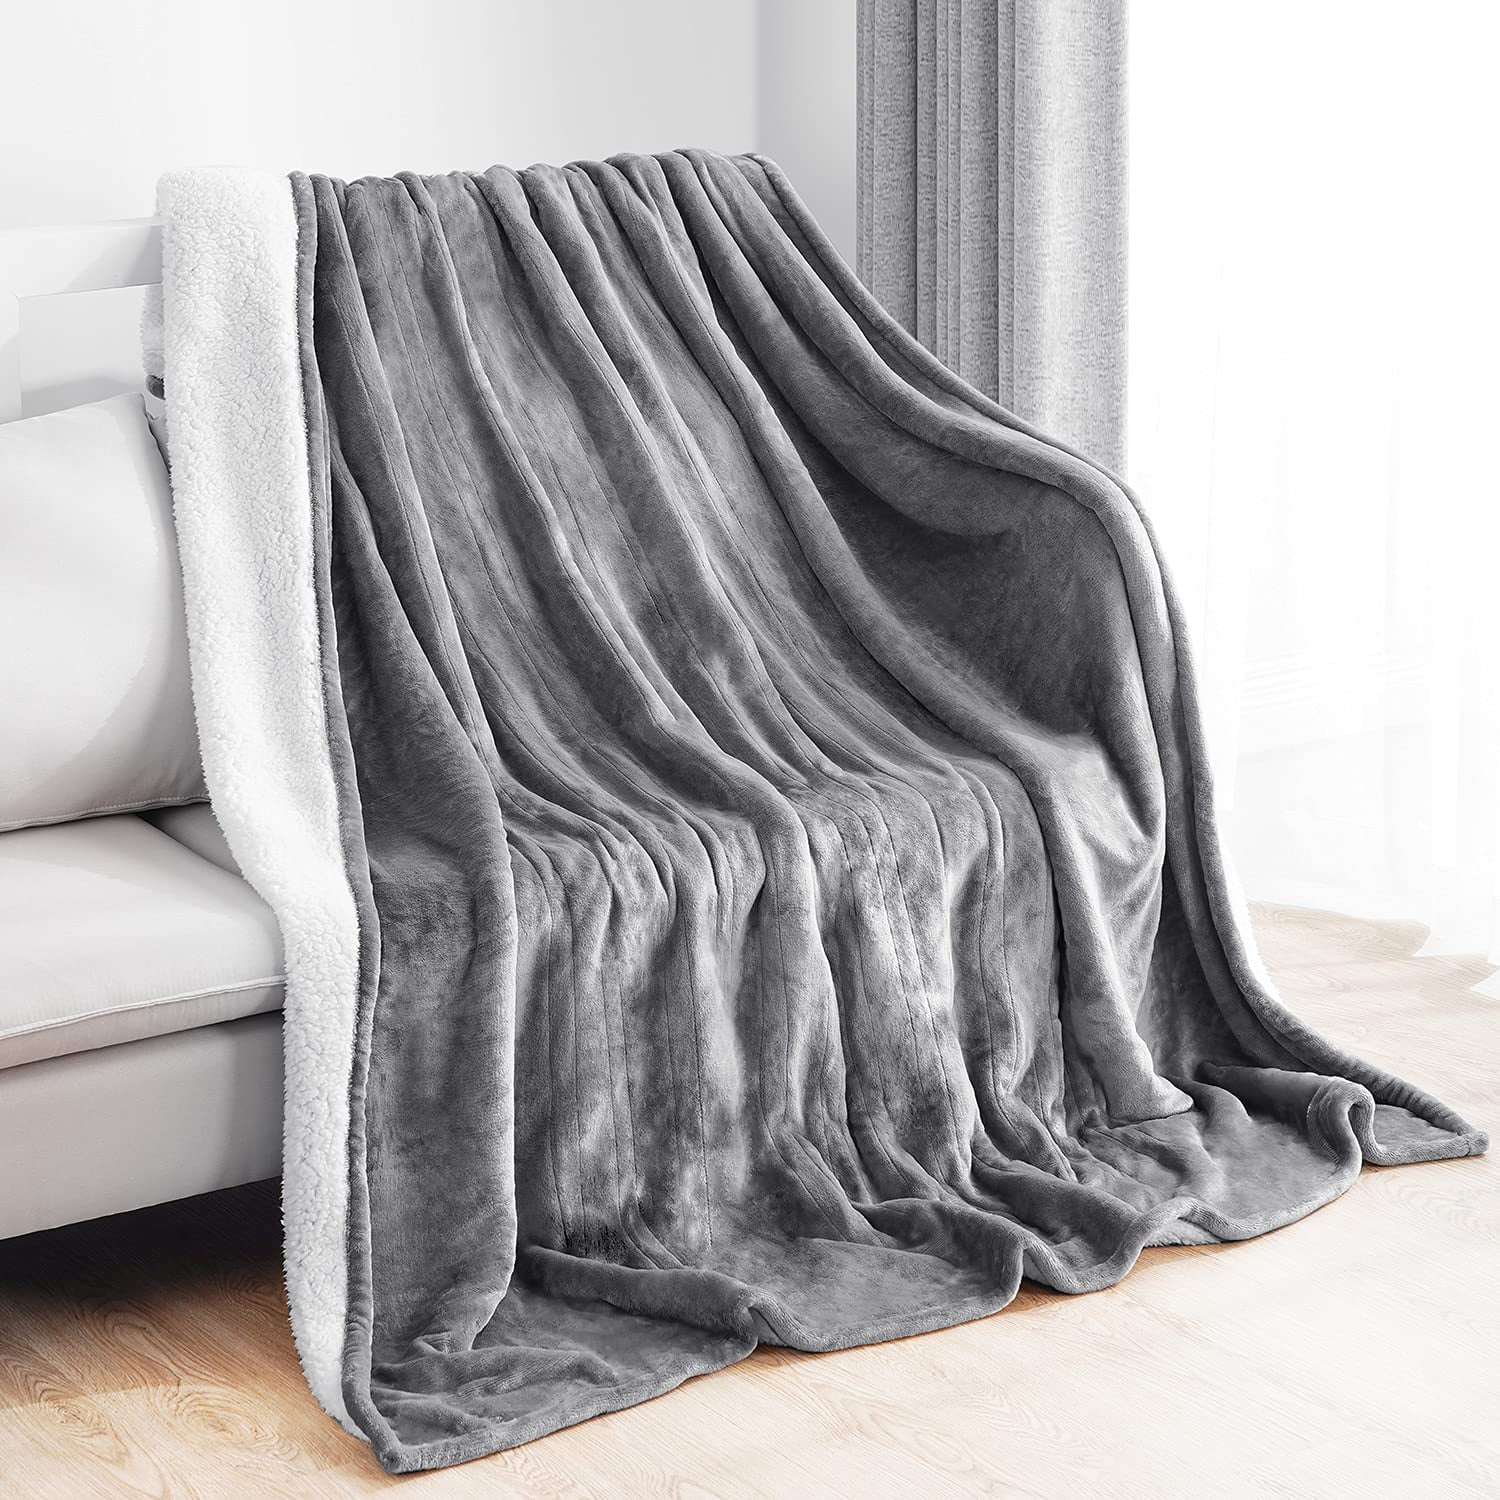 Heated Throw Warm Blanket Blankie Bed Bedclothes Sofa Cold Hot 50 by 62-Inch 